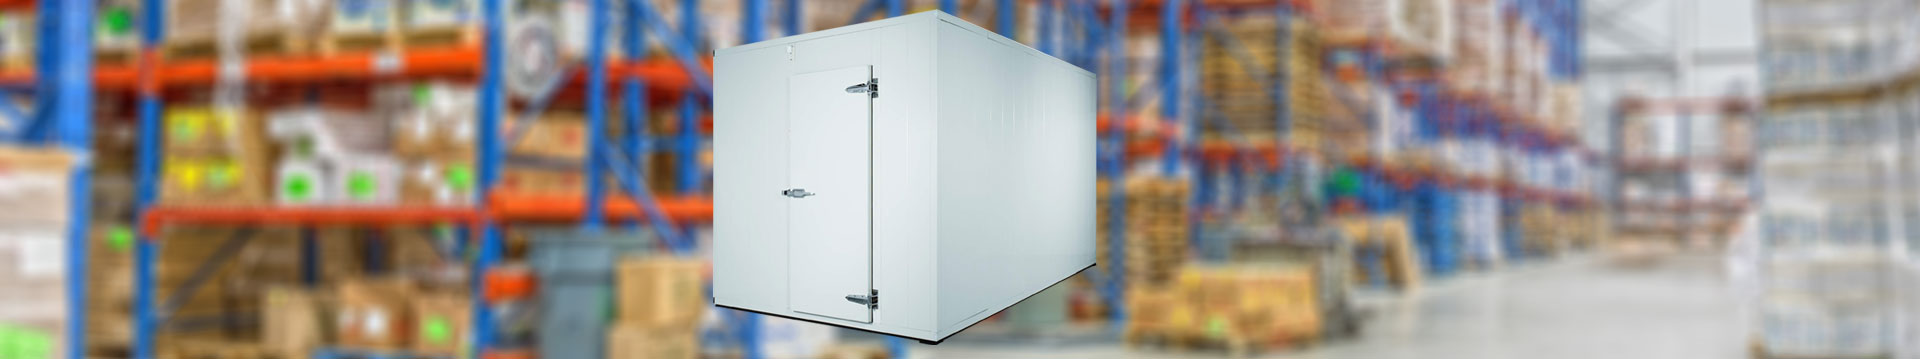 Container Reefer | Refrigeration Unit For Cold Room